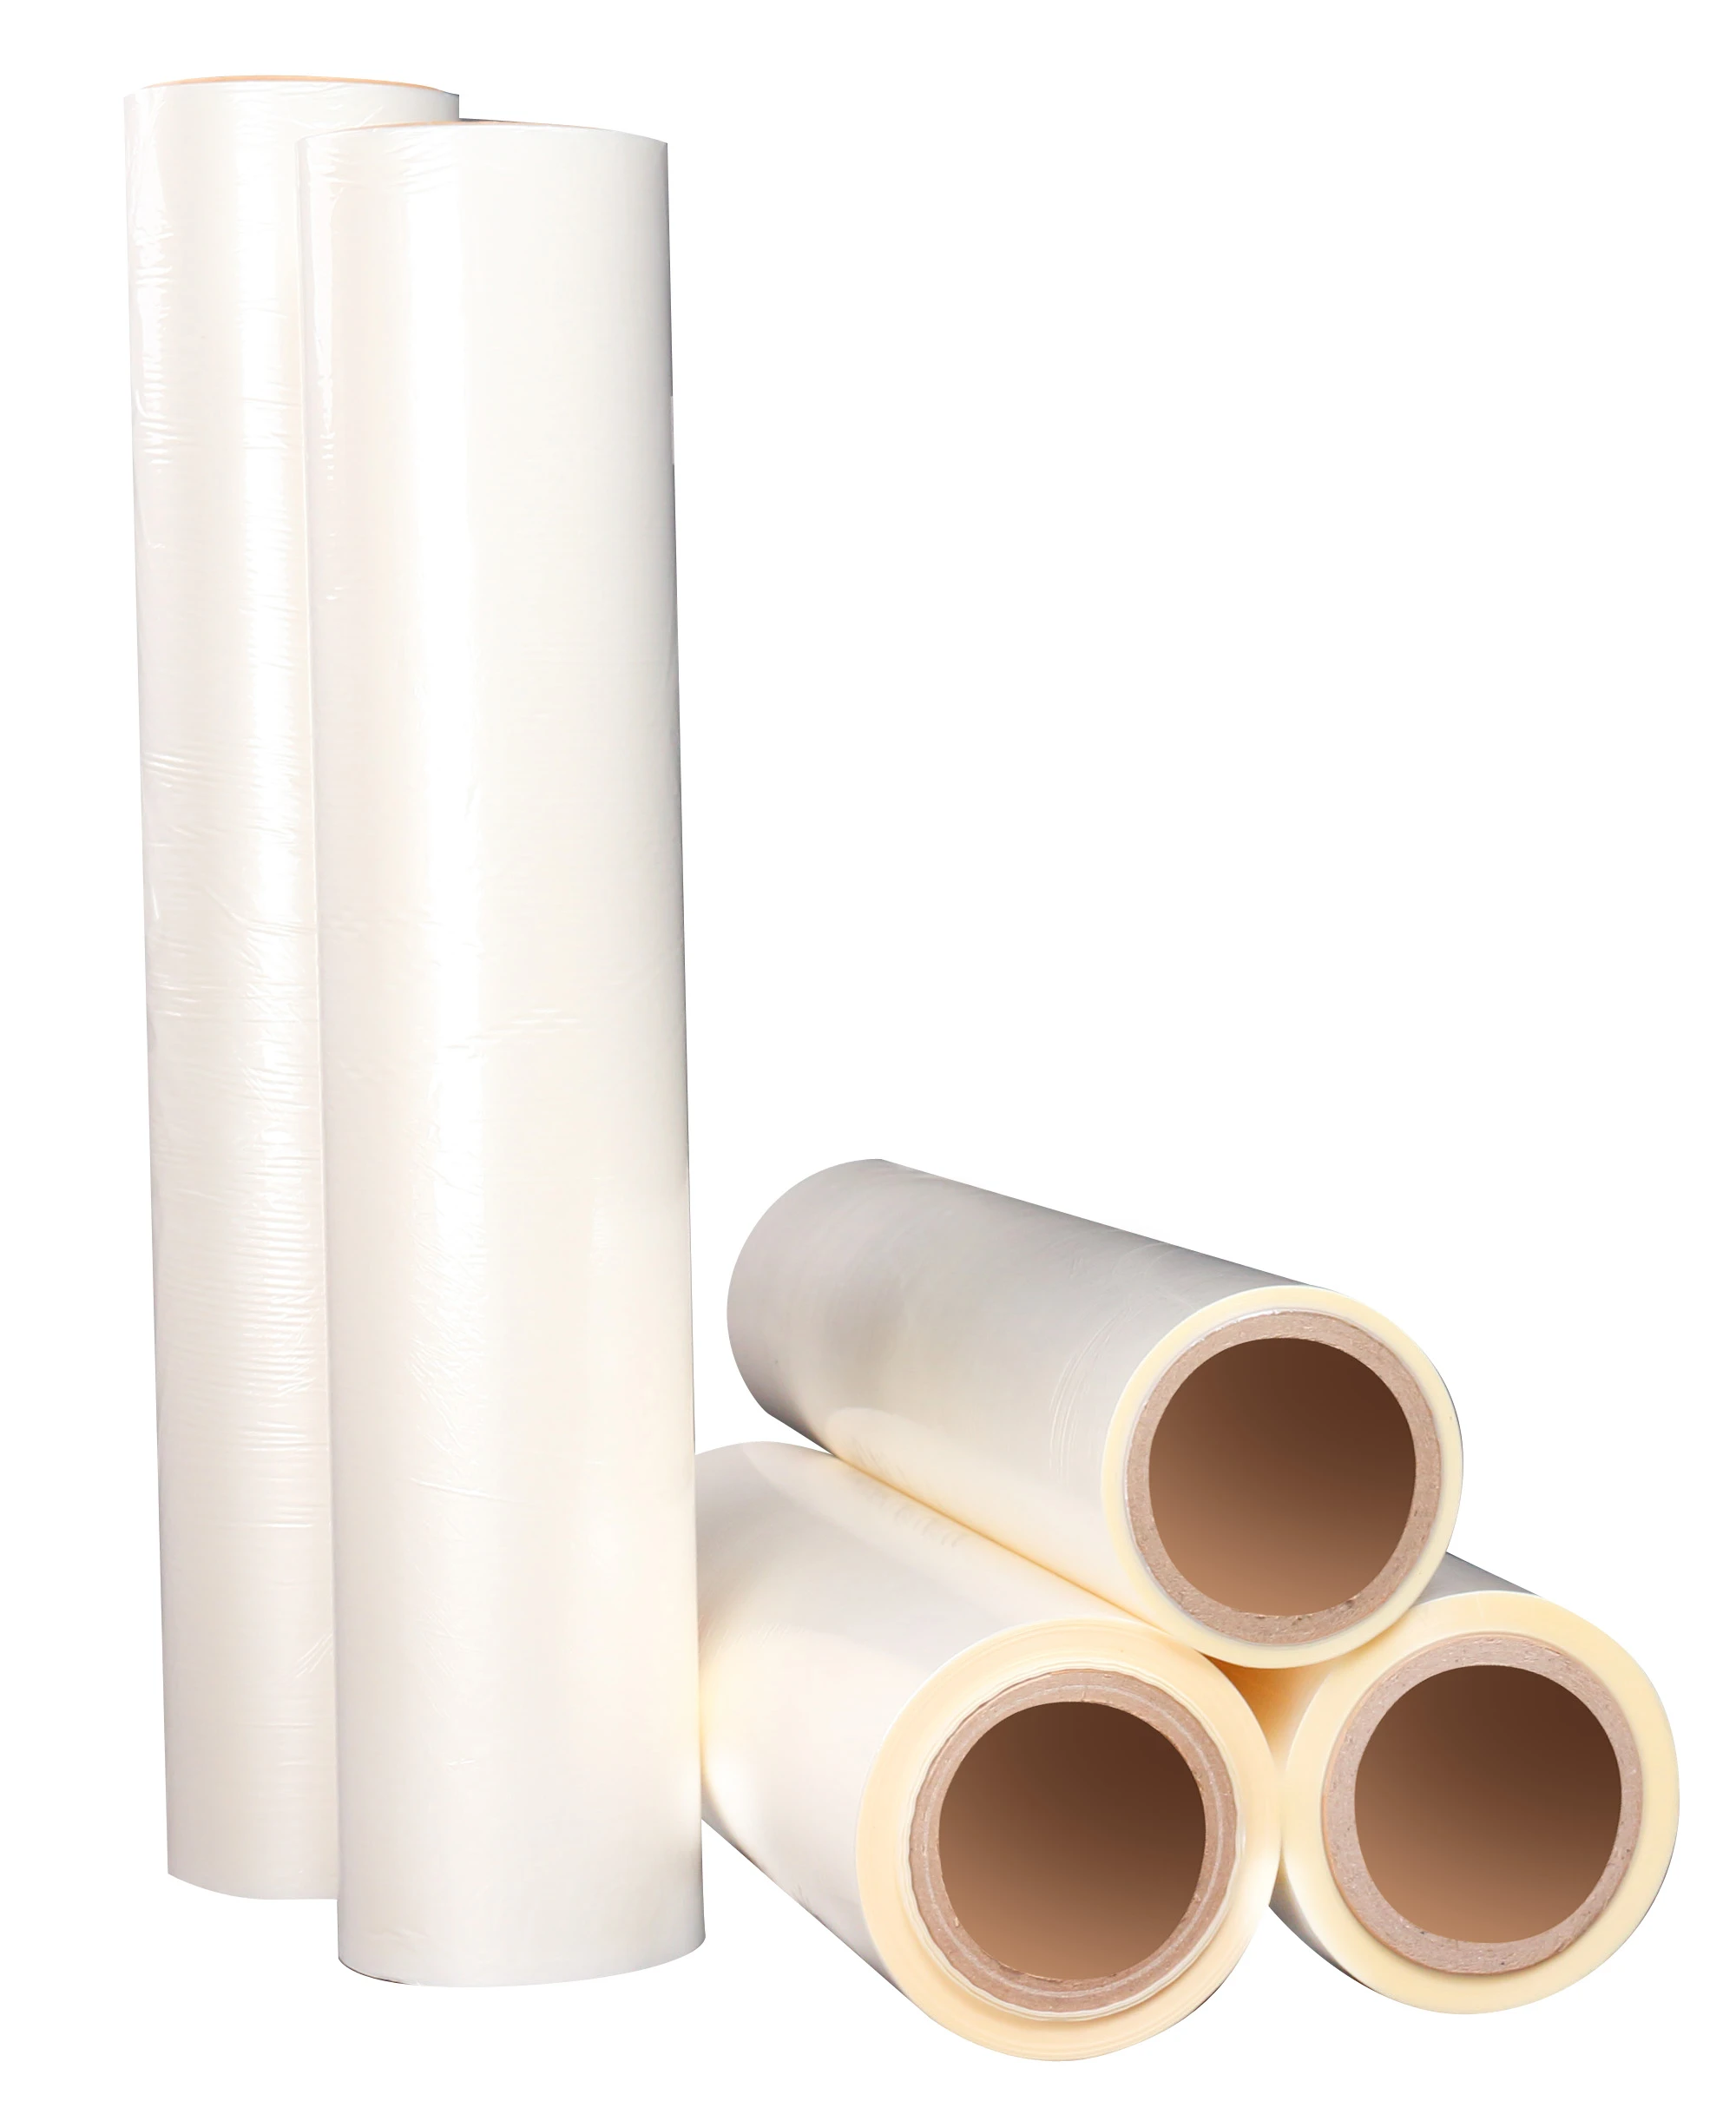 BOPP thermal lamination film with high quality reasonable price